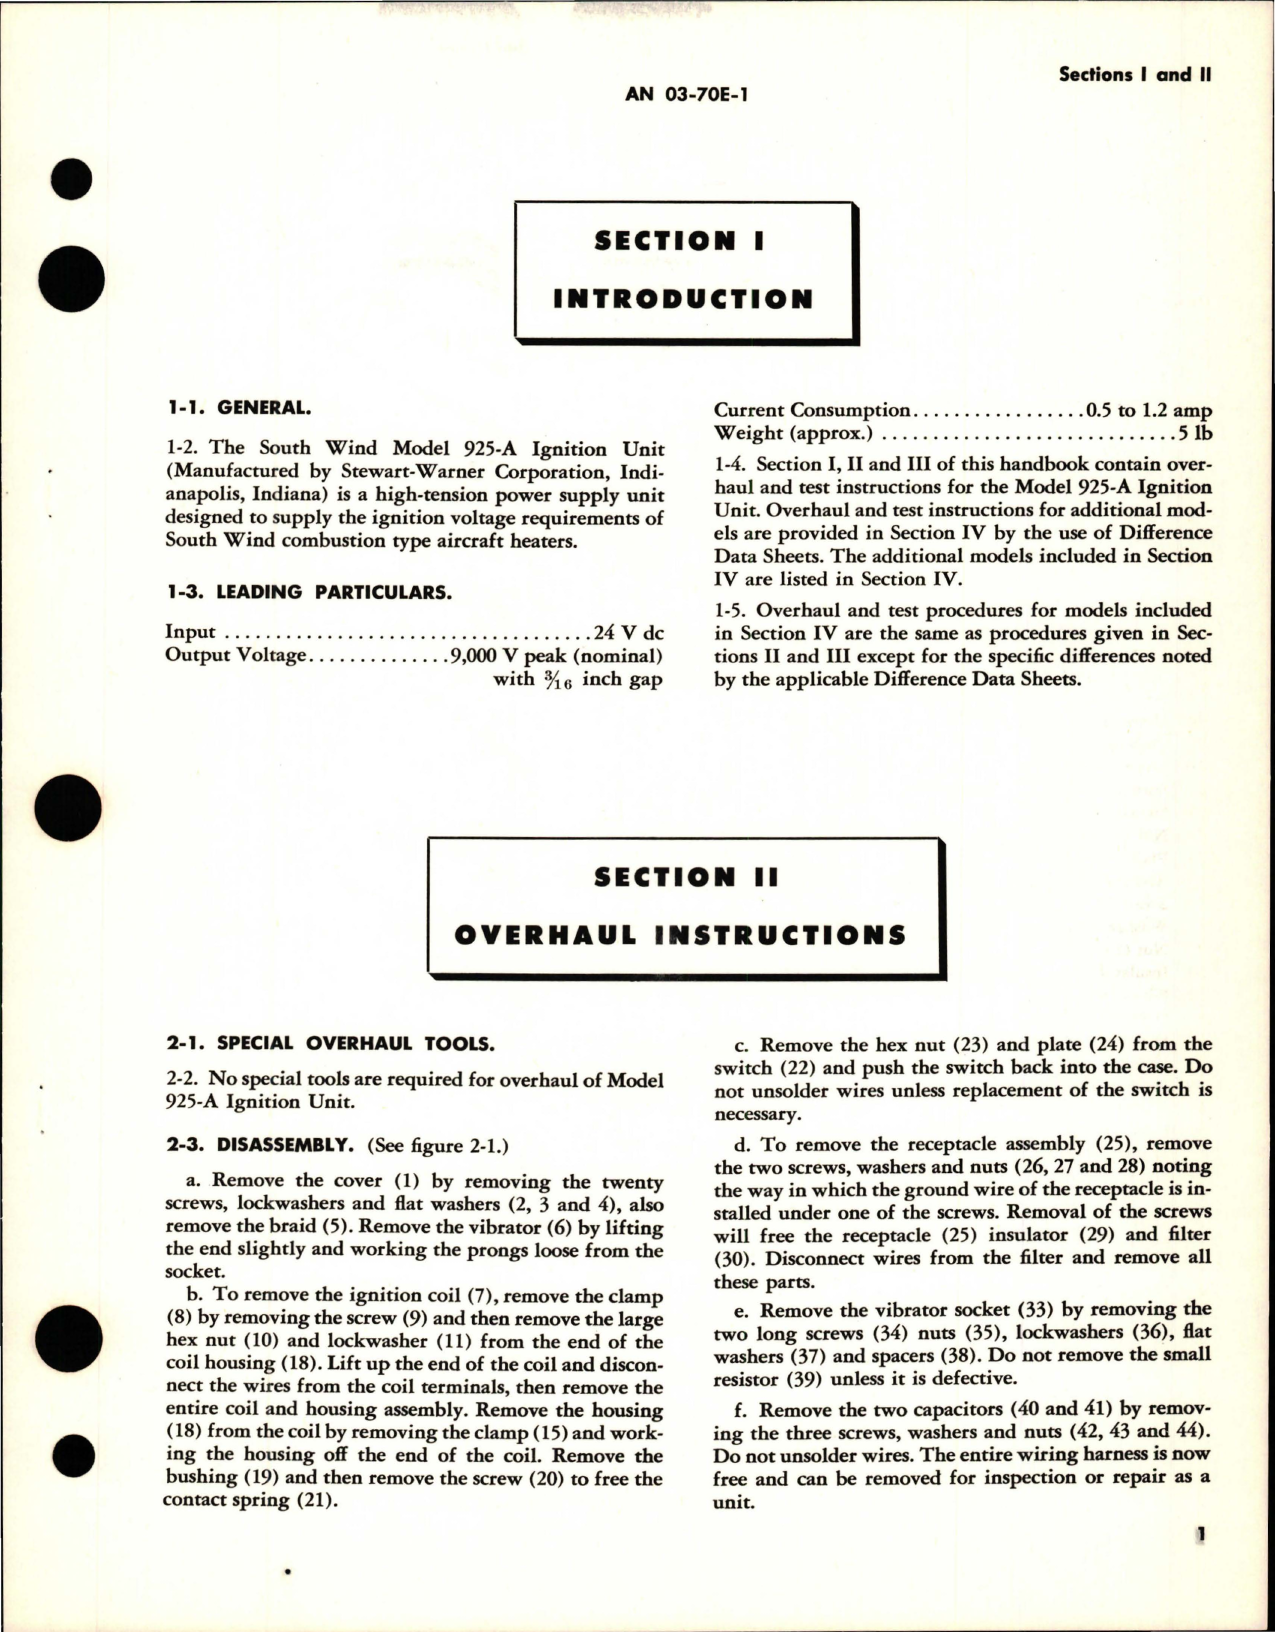 Sample page 5 from AirCorps Library document: Overhaul Instructions for Ignition Units - Model 925 Series